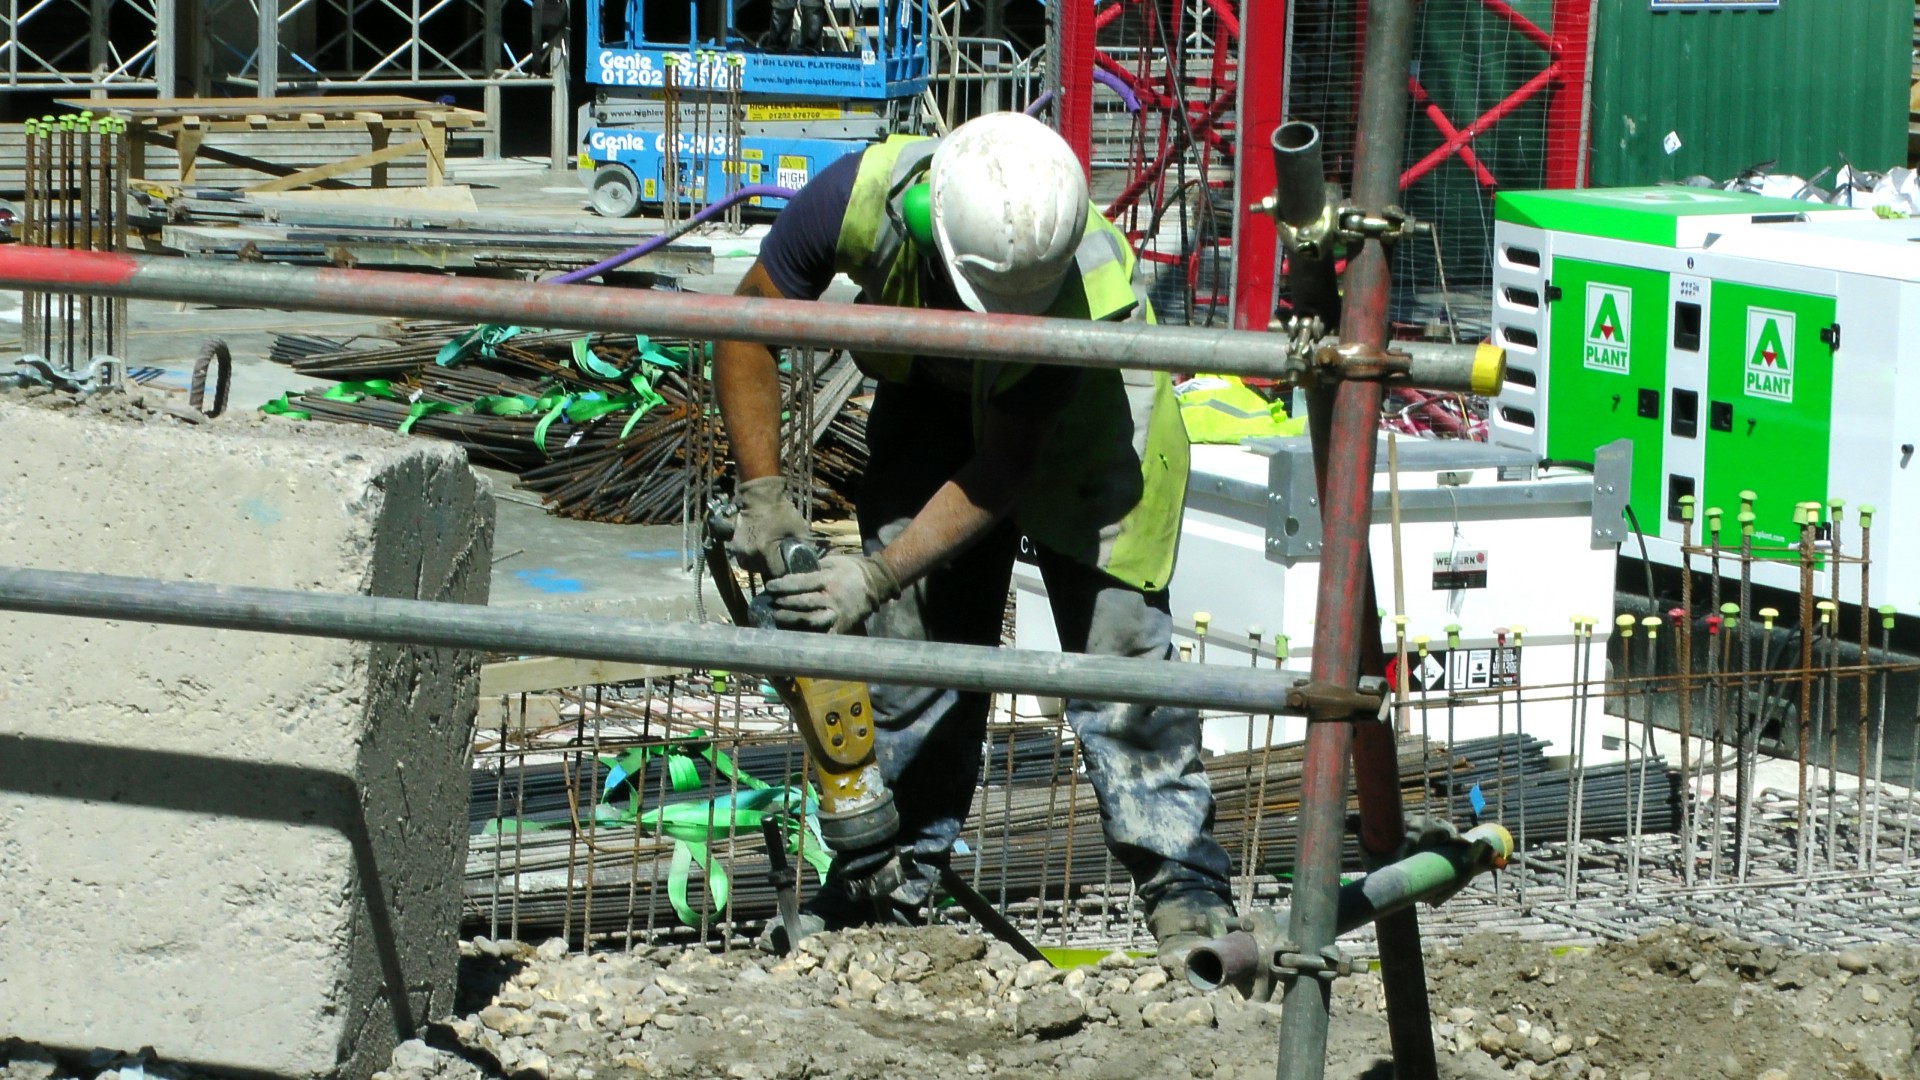 Construction Site Worker With Pneumatic Drill